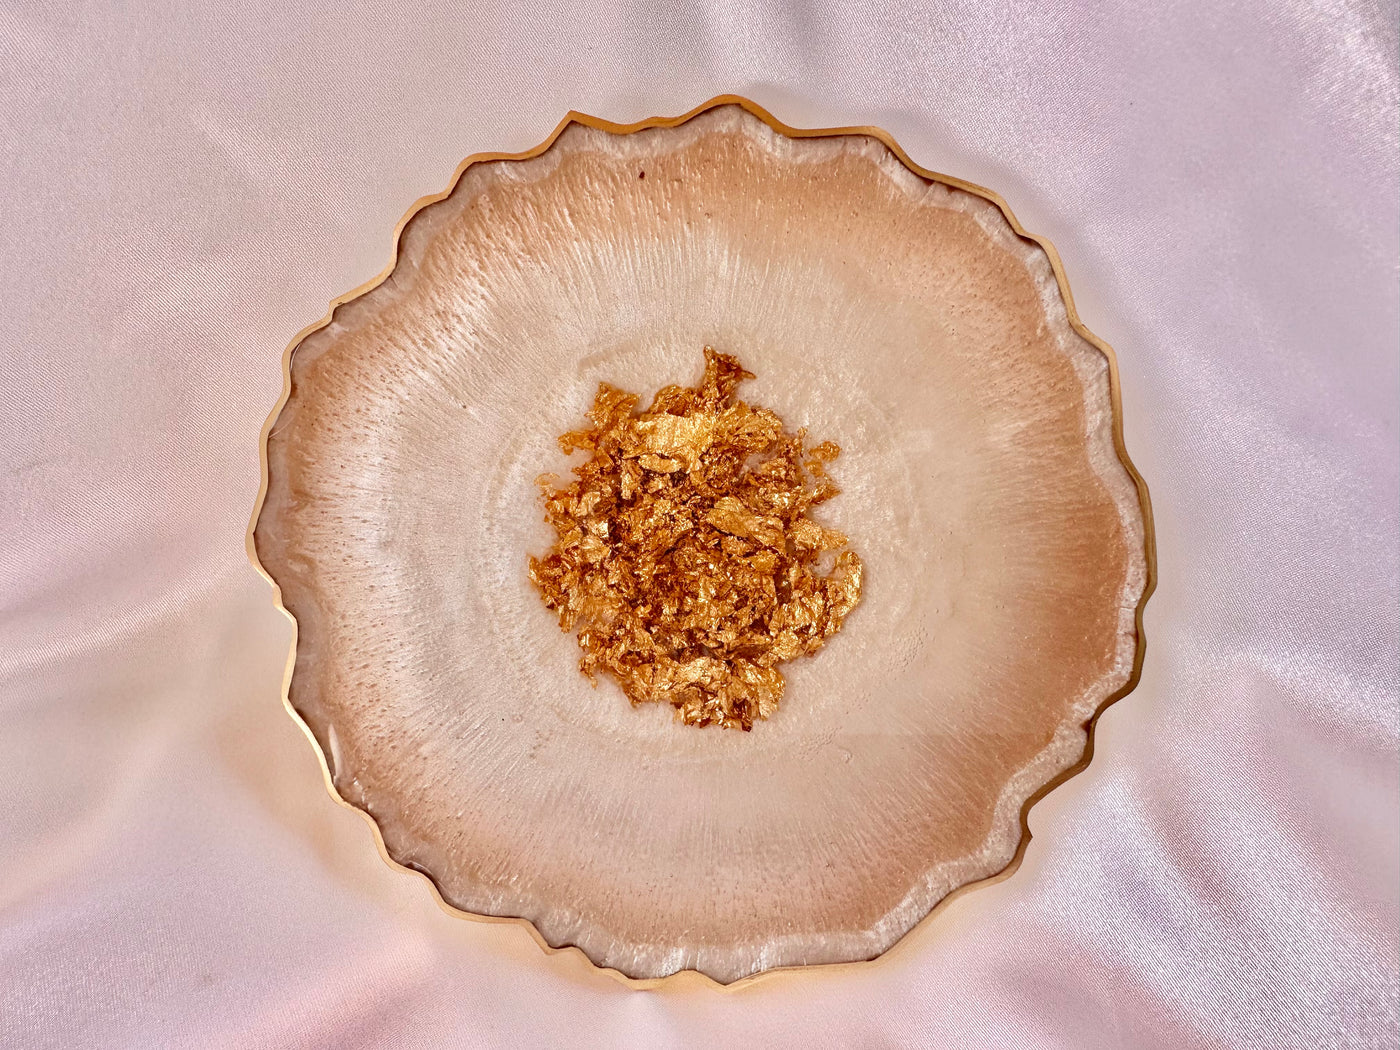 Handmade Beige Cream and Gold Irregular Shaped Large Geode Agate Resin Coasters with Gold Accented Rim Edges - Jasmin Renee Art - Single Coaster